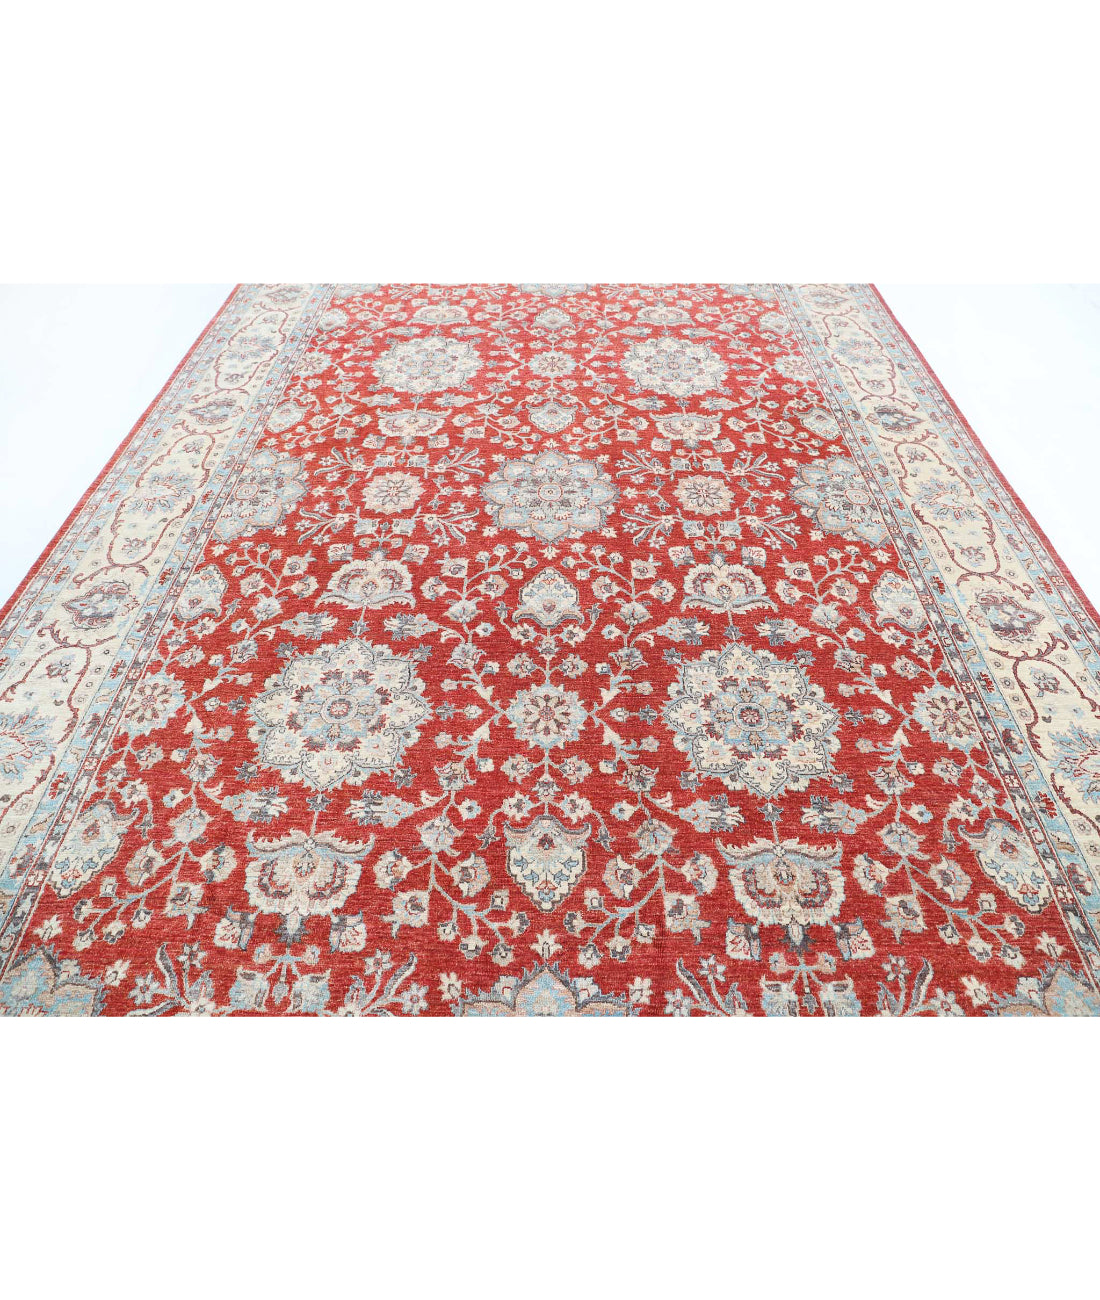 Ziegler 9'2'' X 13'4'' Hand-Knotted Wool Rug 9'2'' x 13'4'' (275 X 400) / Red / Ivory